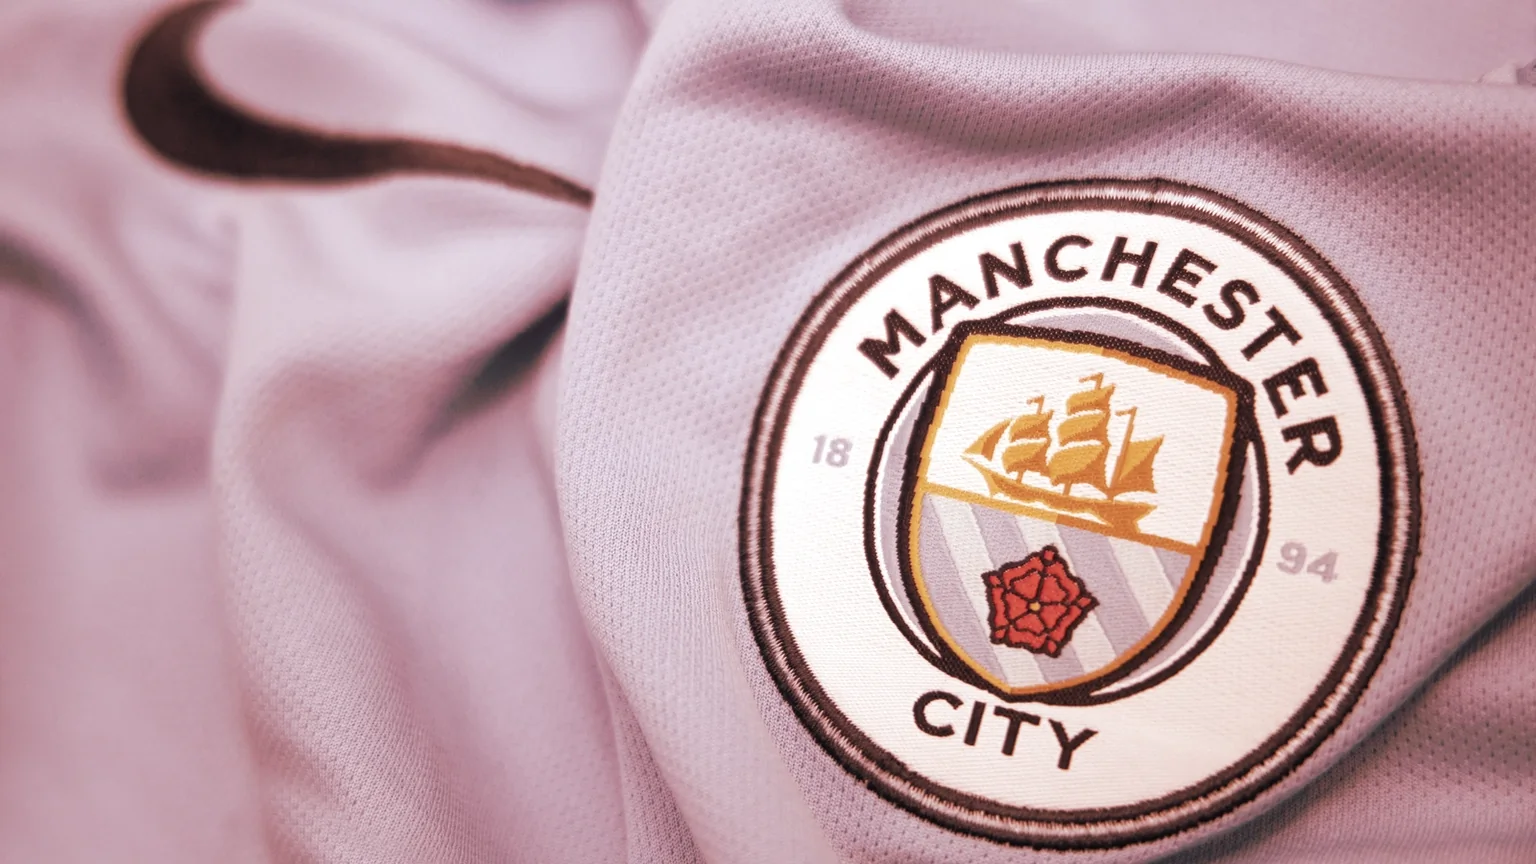 The Logo of Manchester City Football Club. Image: Shutterstock